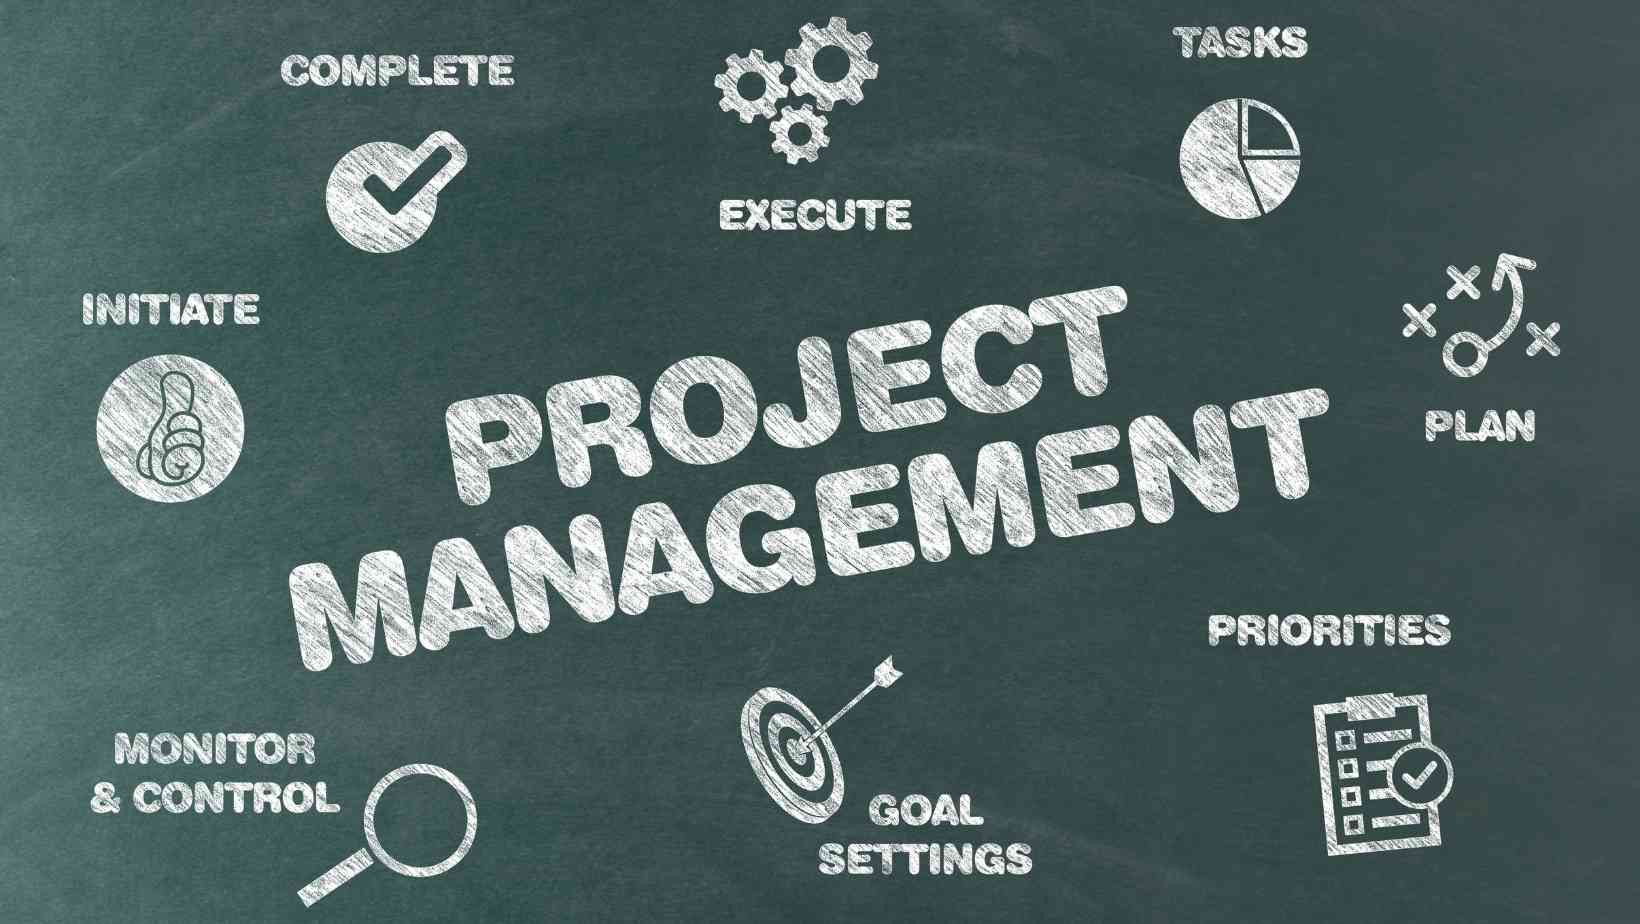 There are lots of different types of careers in project management from construction to transformation.